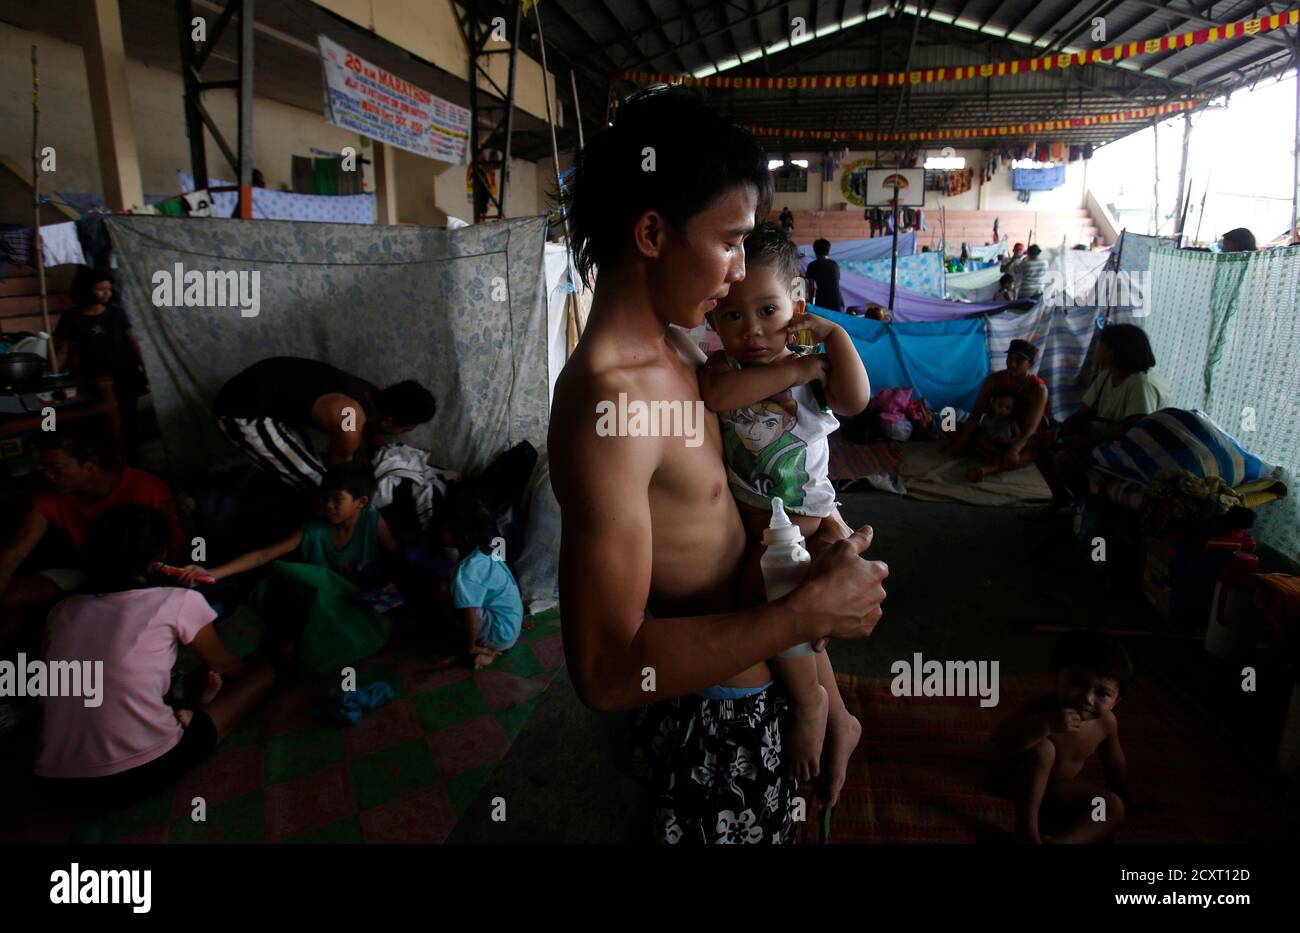 A man carries his child at an evacuation centre for flood victims in Calumpit, Bulacan, north of Manila, August 22, 2013. The southwest monsoon that wreaked havoc on Metro Manila and nearby areas earlier this week is likely to weaken now that Typhoon Trami made landfall over China, state weather forecasters said Thursday. The death toll from the heavy monsoon rain and floods since last weekend rose to at least 16 as of Thursday morning, the National Disaster Risk Reduction and Management Council said.  REUTERS/Erik De Castro (PHILIPPINES - Tags: DISASTER ENVIRONMENT) Stock Photo